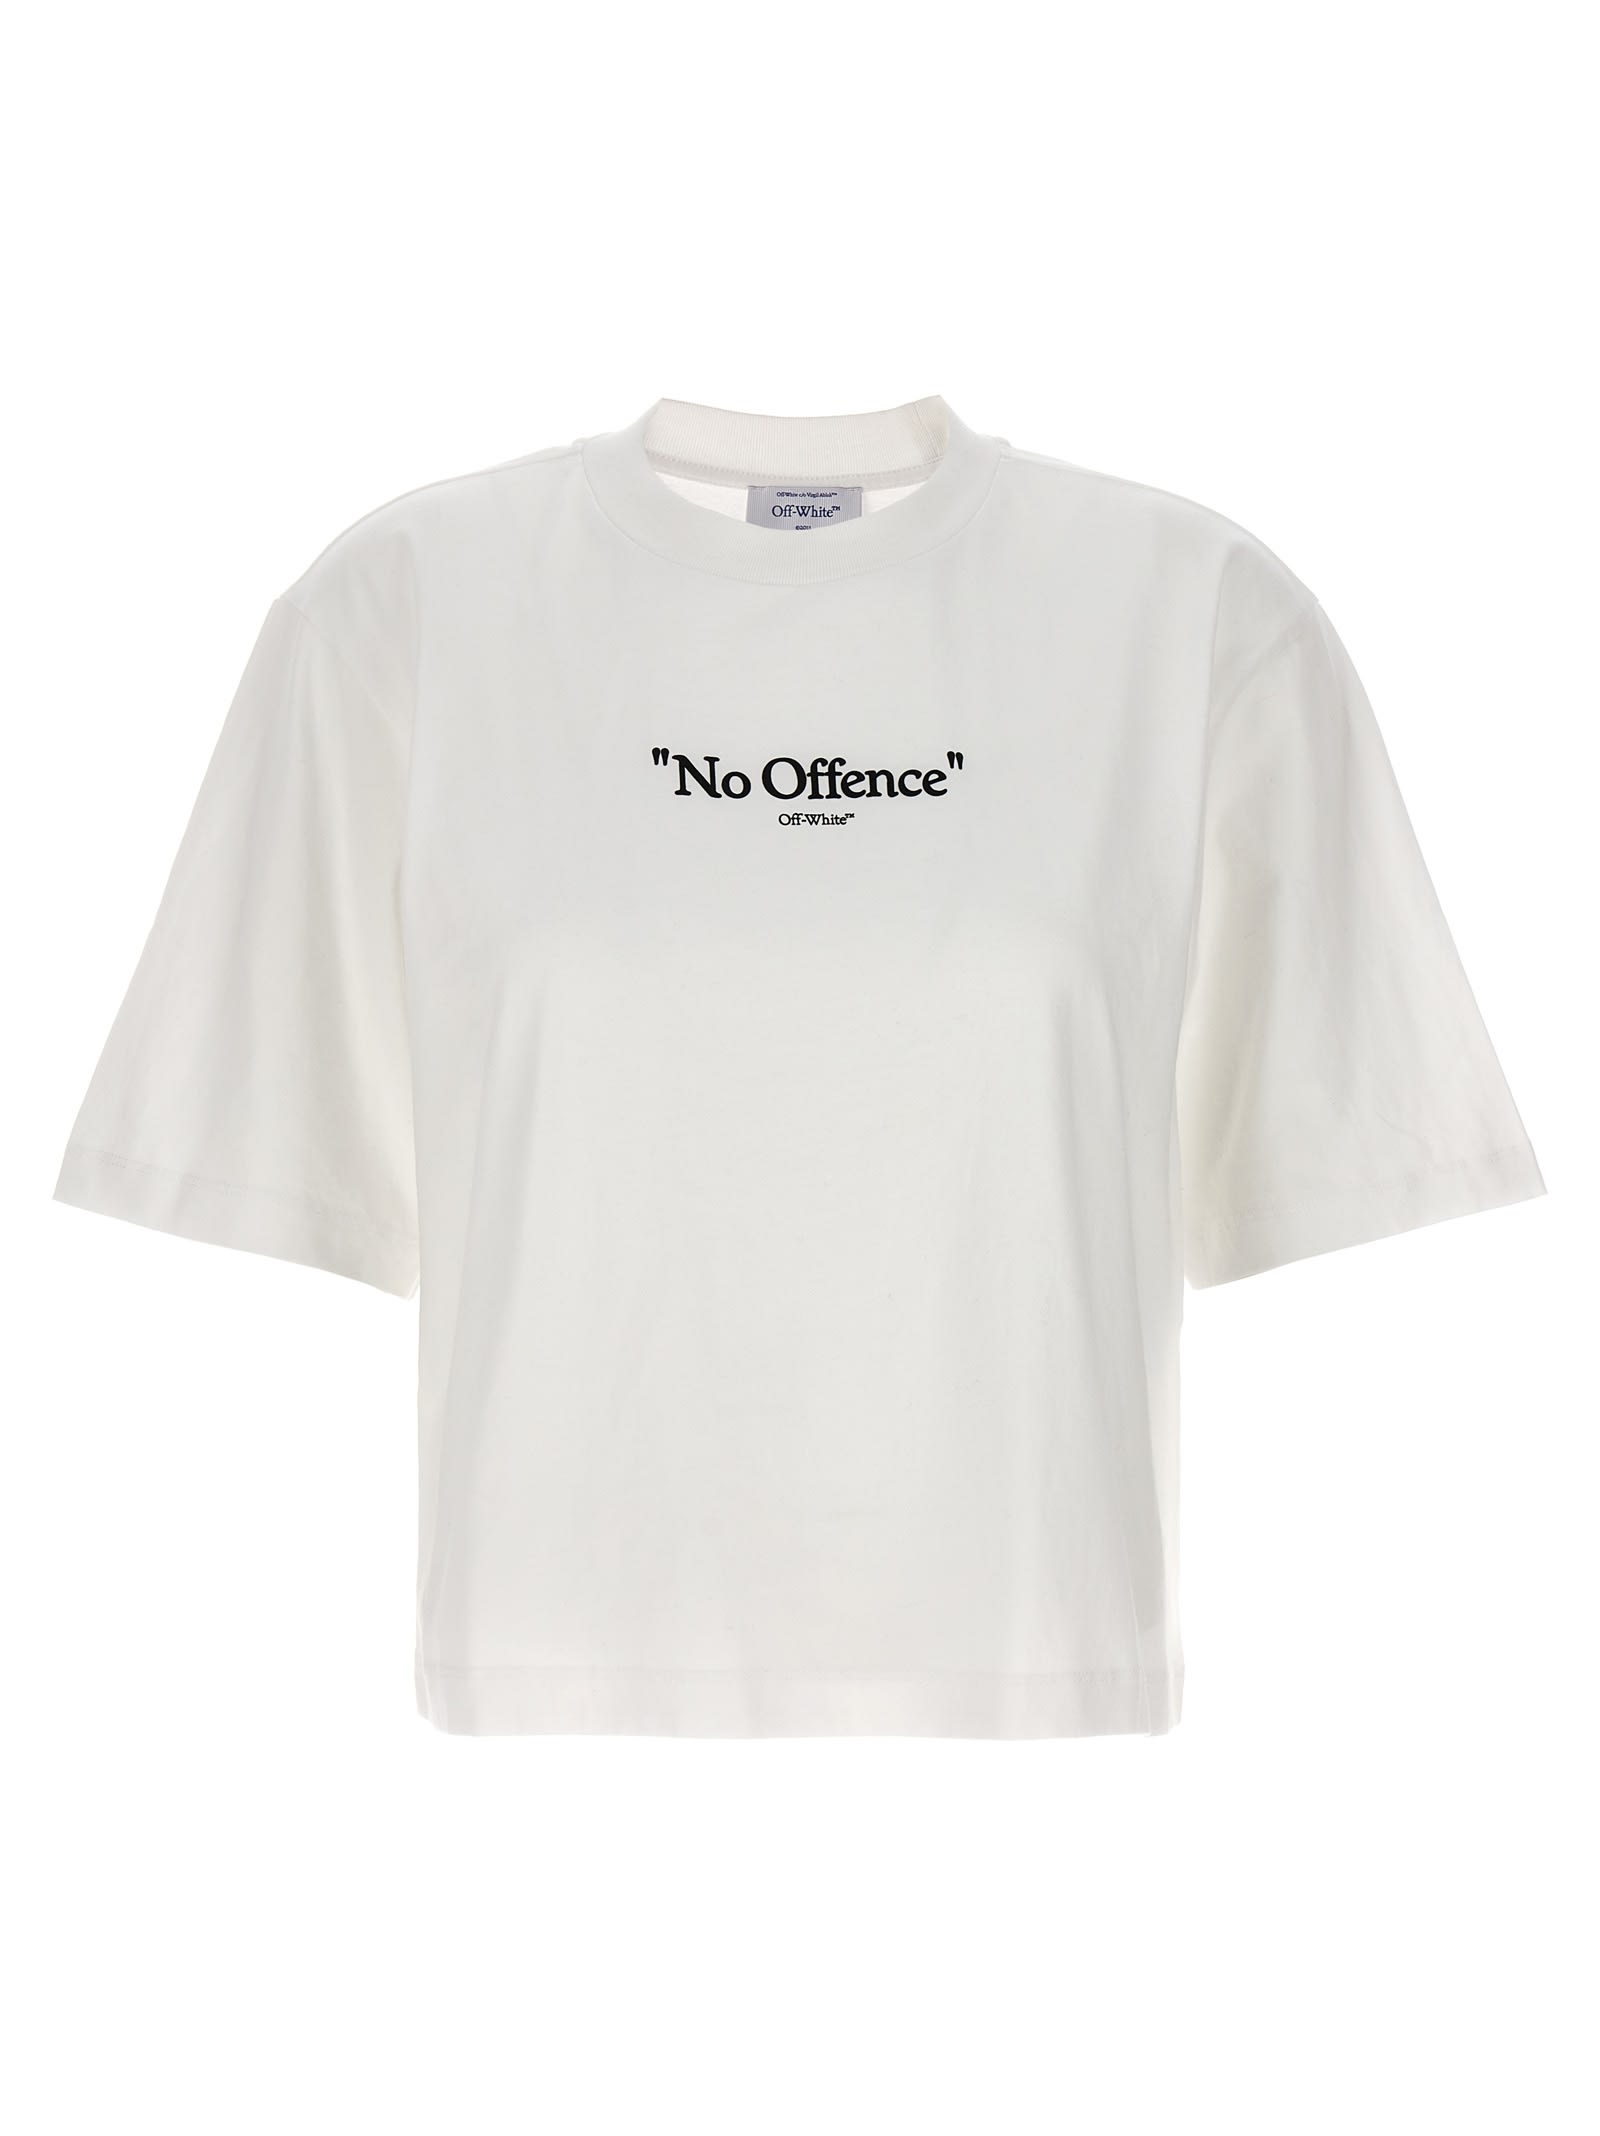 OFF-WHITE NO OFFENCE T-SHIRT